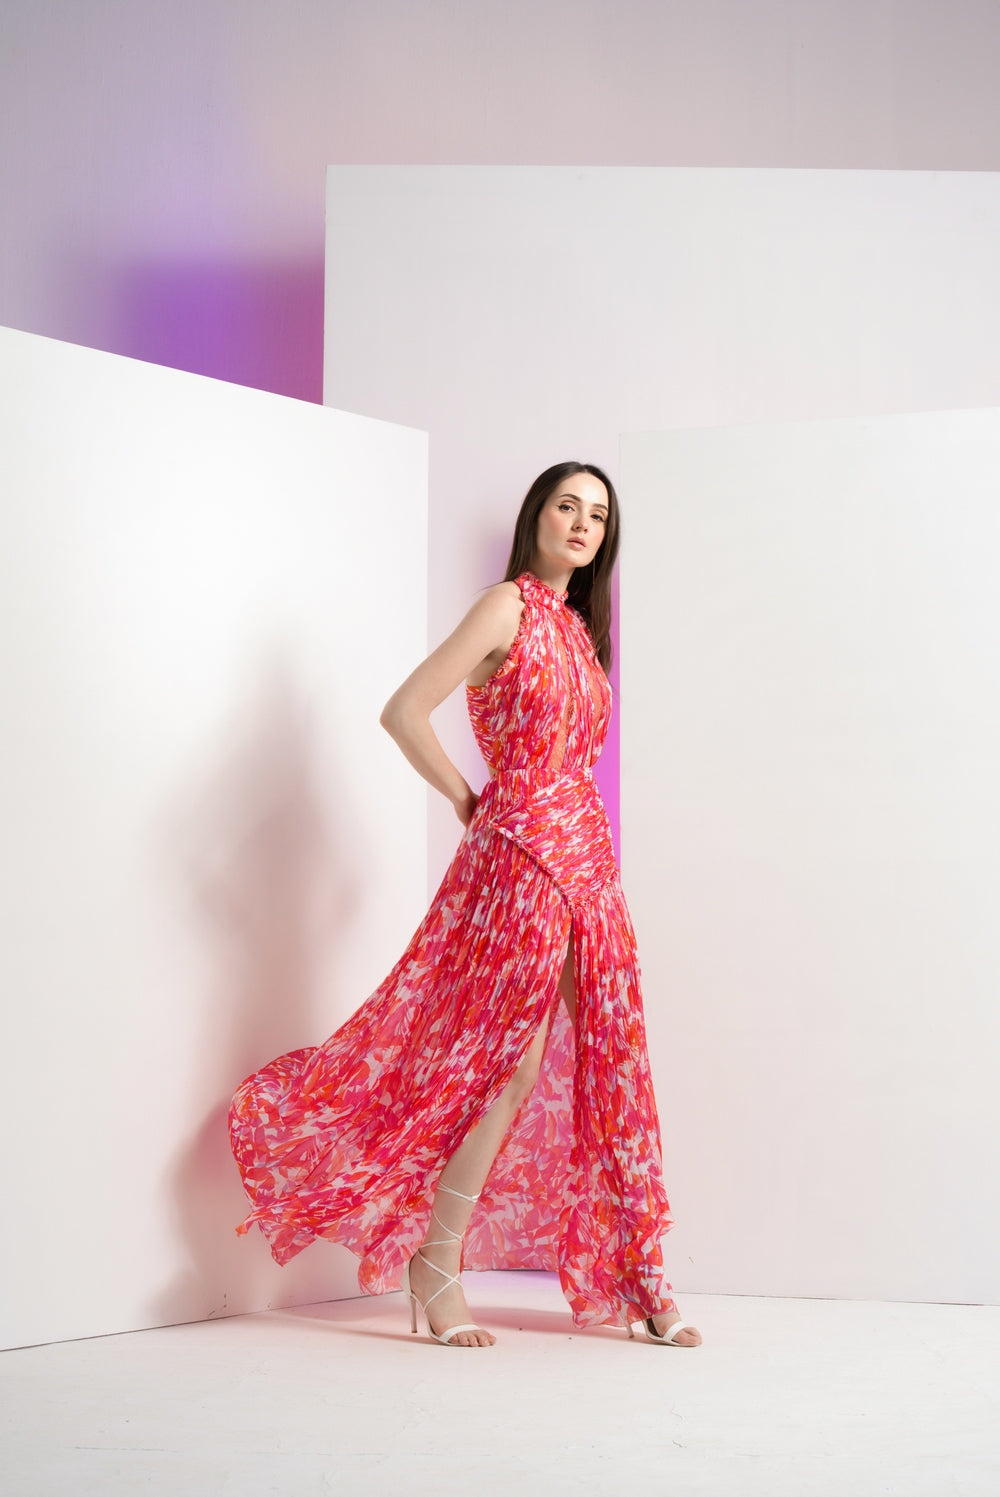 Pink geometric chaos full length dress with stylized back